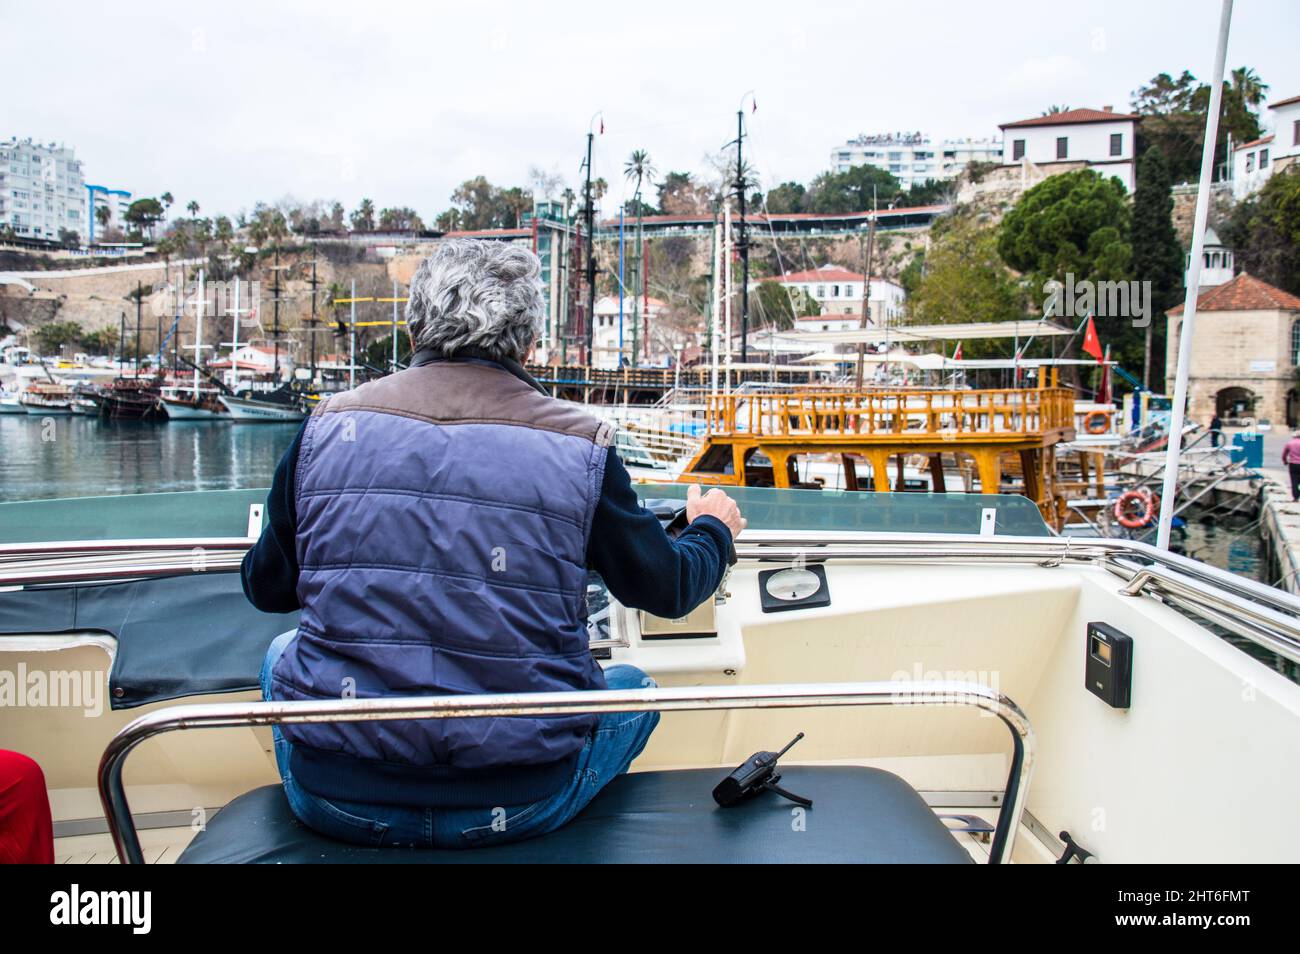 Turkish adult age 60 with grey hair operating a tourism Yacht boat Stock Photo